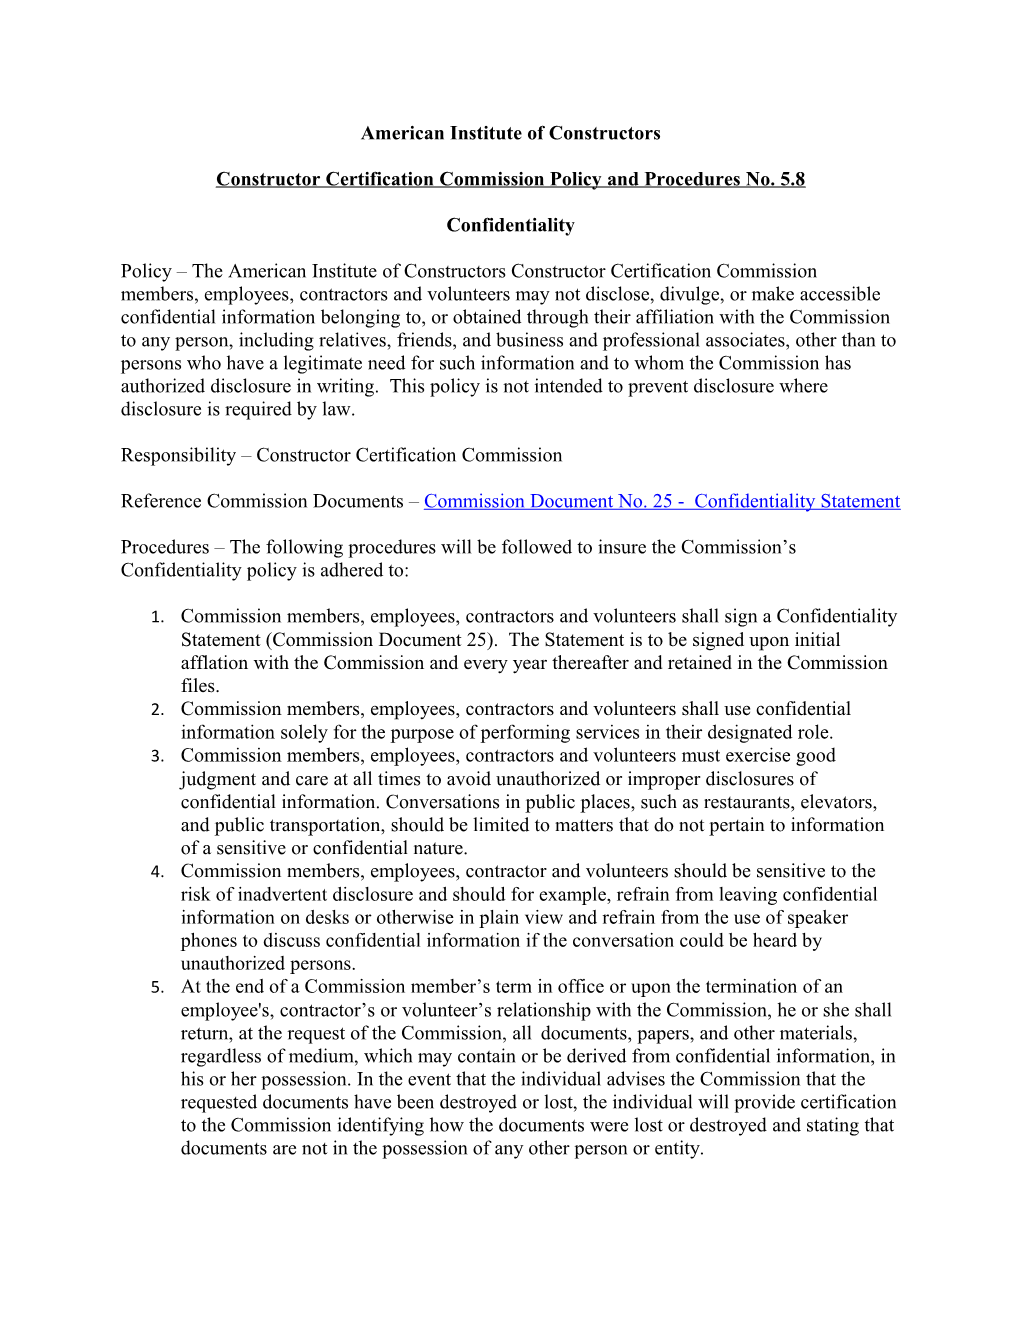 Constructor Certification Commission Policy and Procedures No. 5.8